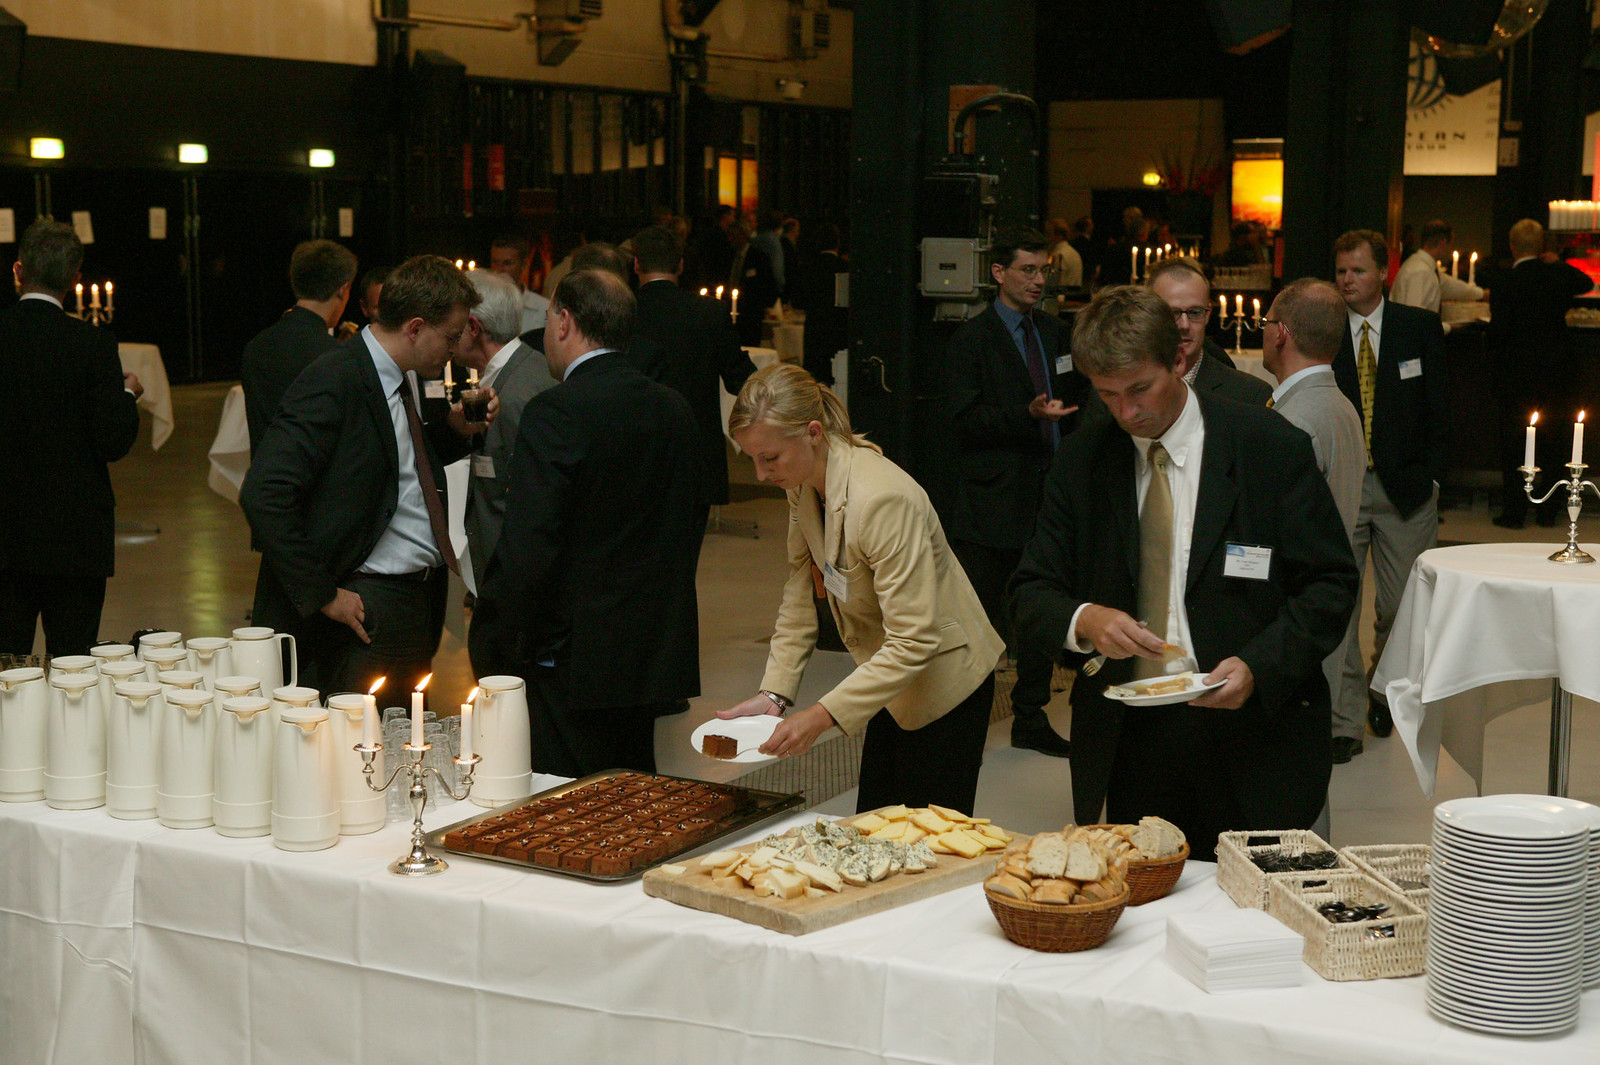 27 Time for dessert buffet and more networking